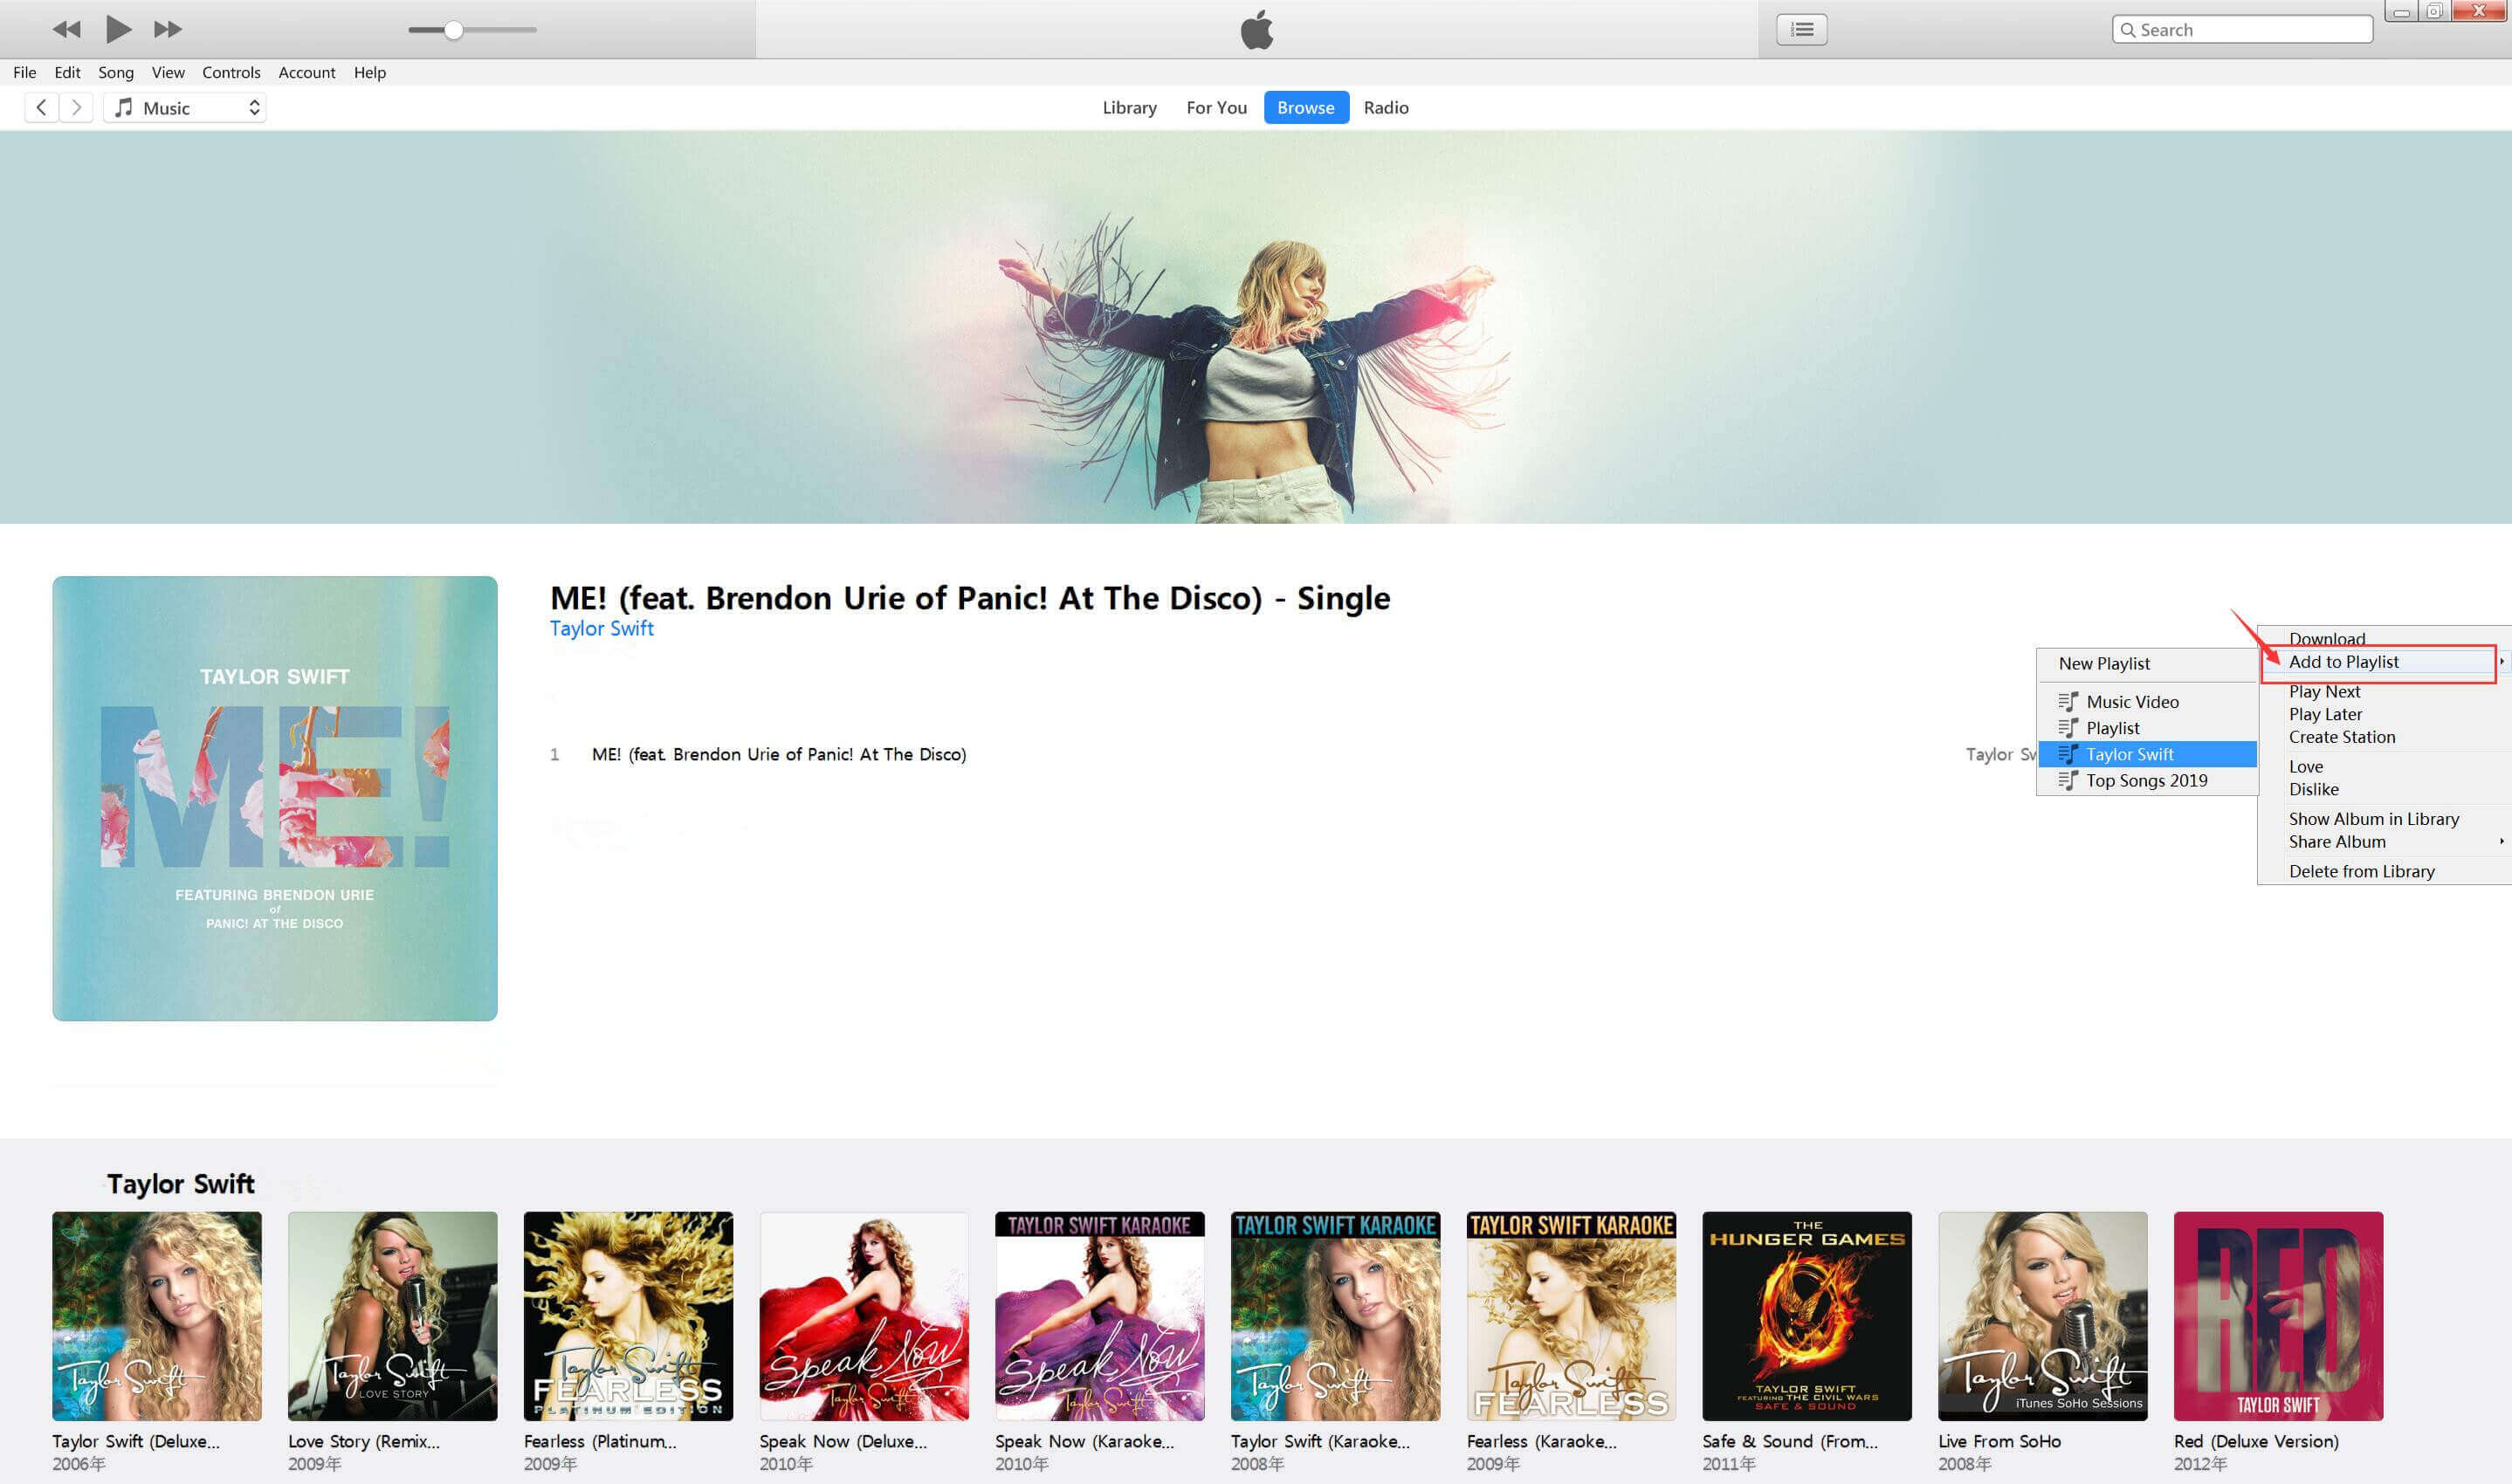 add Taylor Swift Songs to iTunes Library